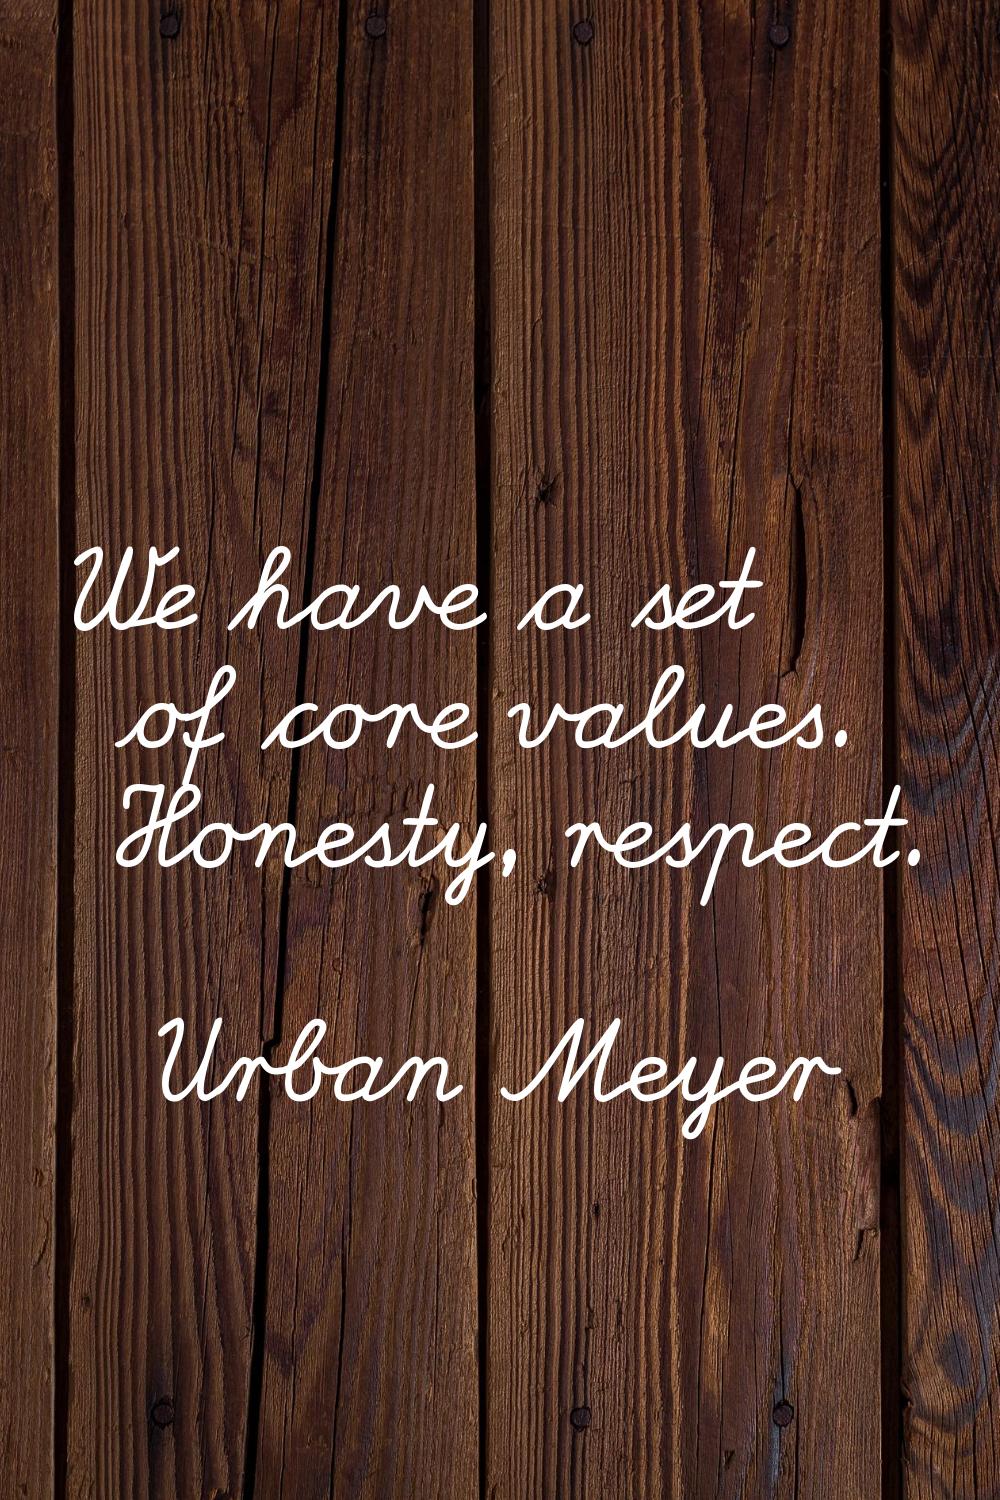 We have a set of core values. Honesty, respect.